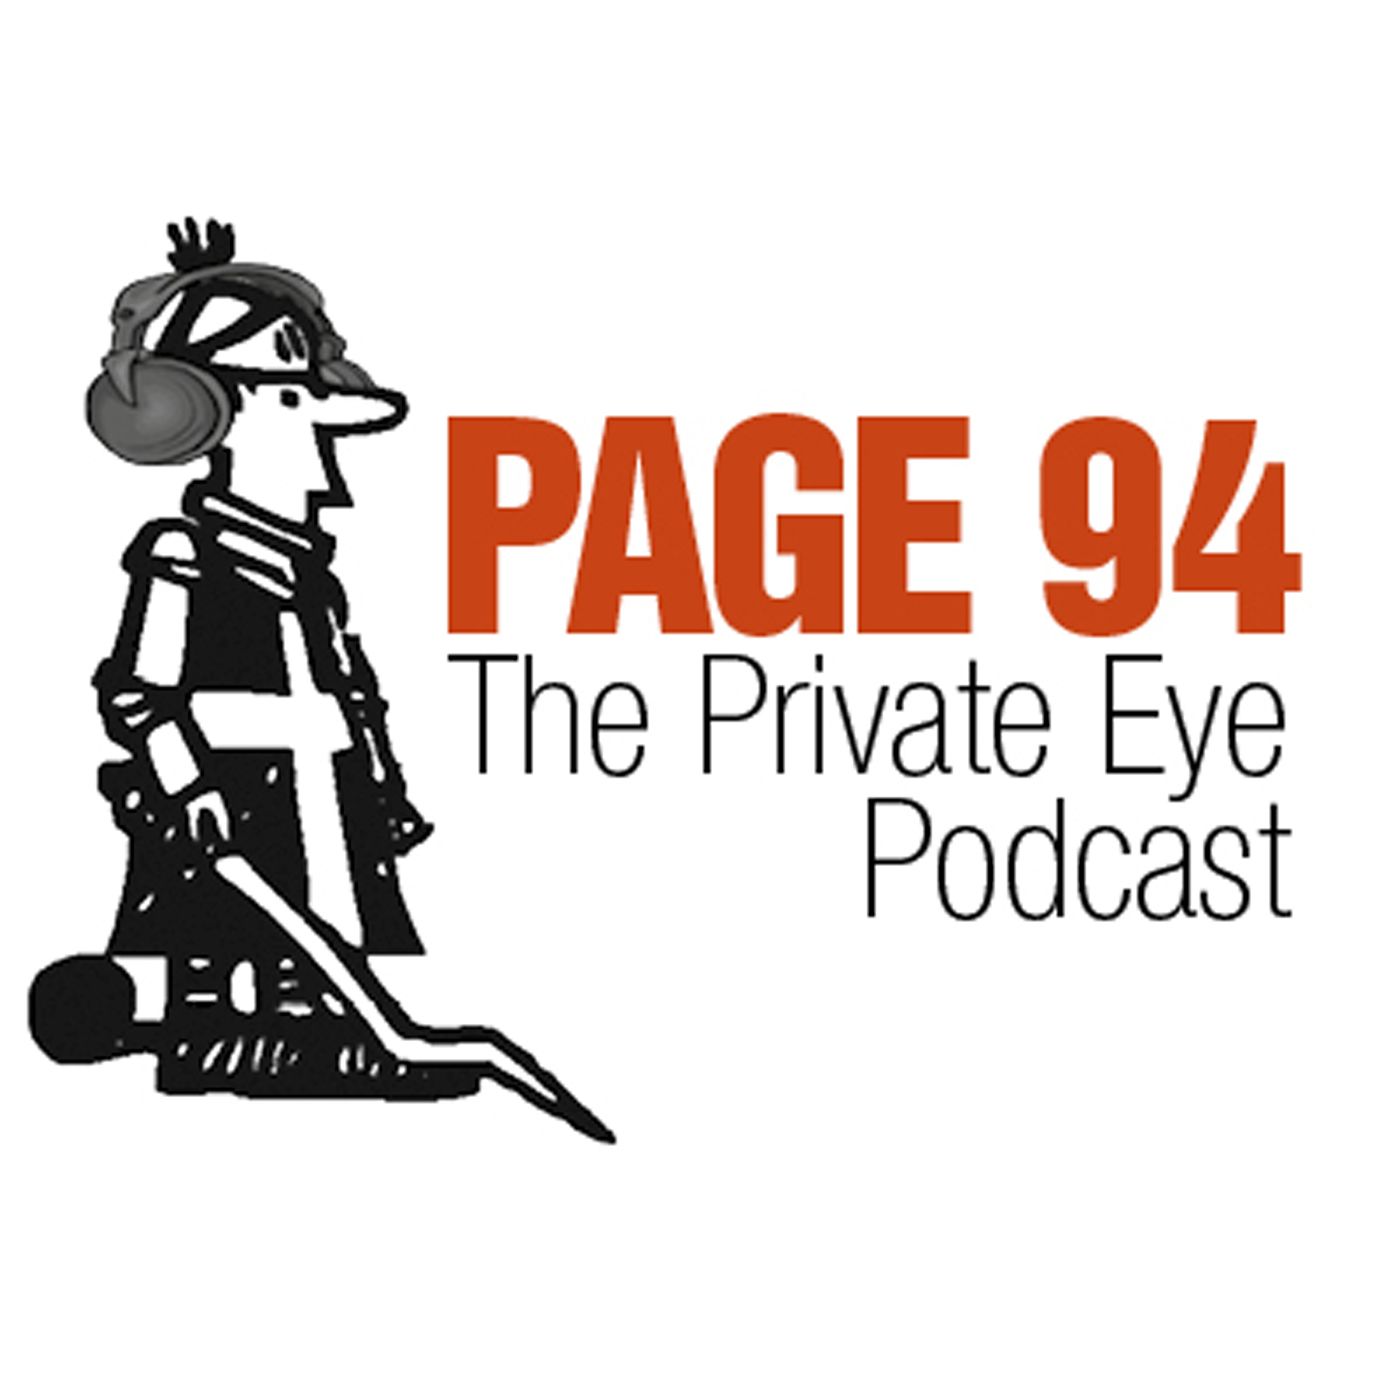 Page 94: The Private Eye Podcast podcast show image